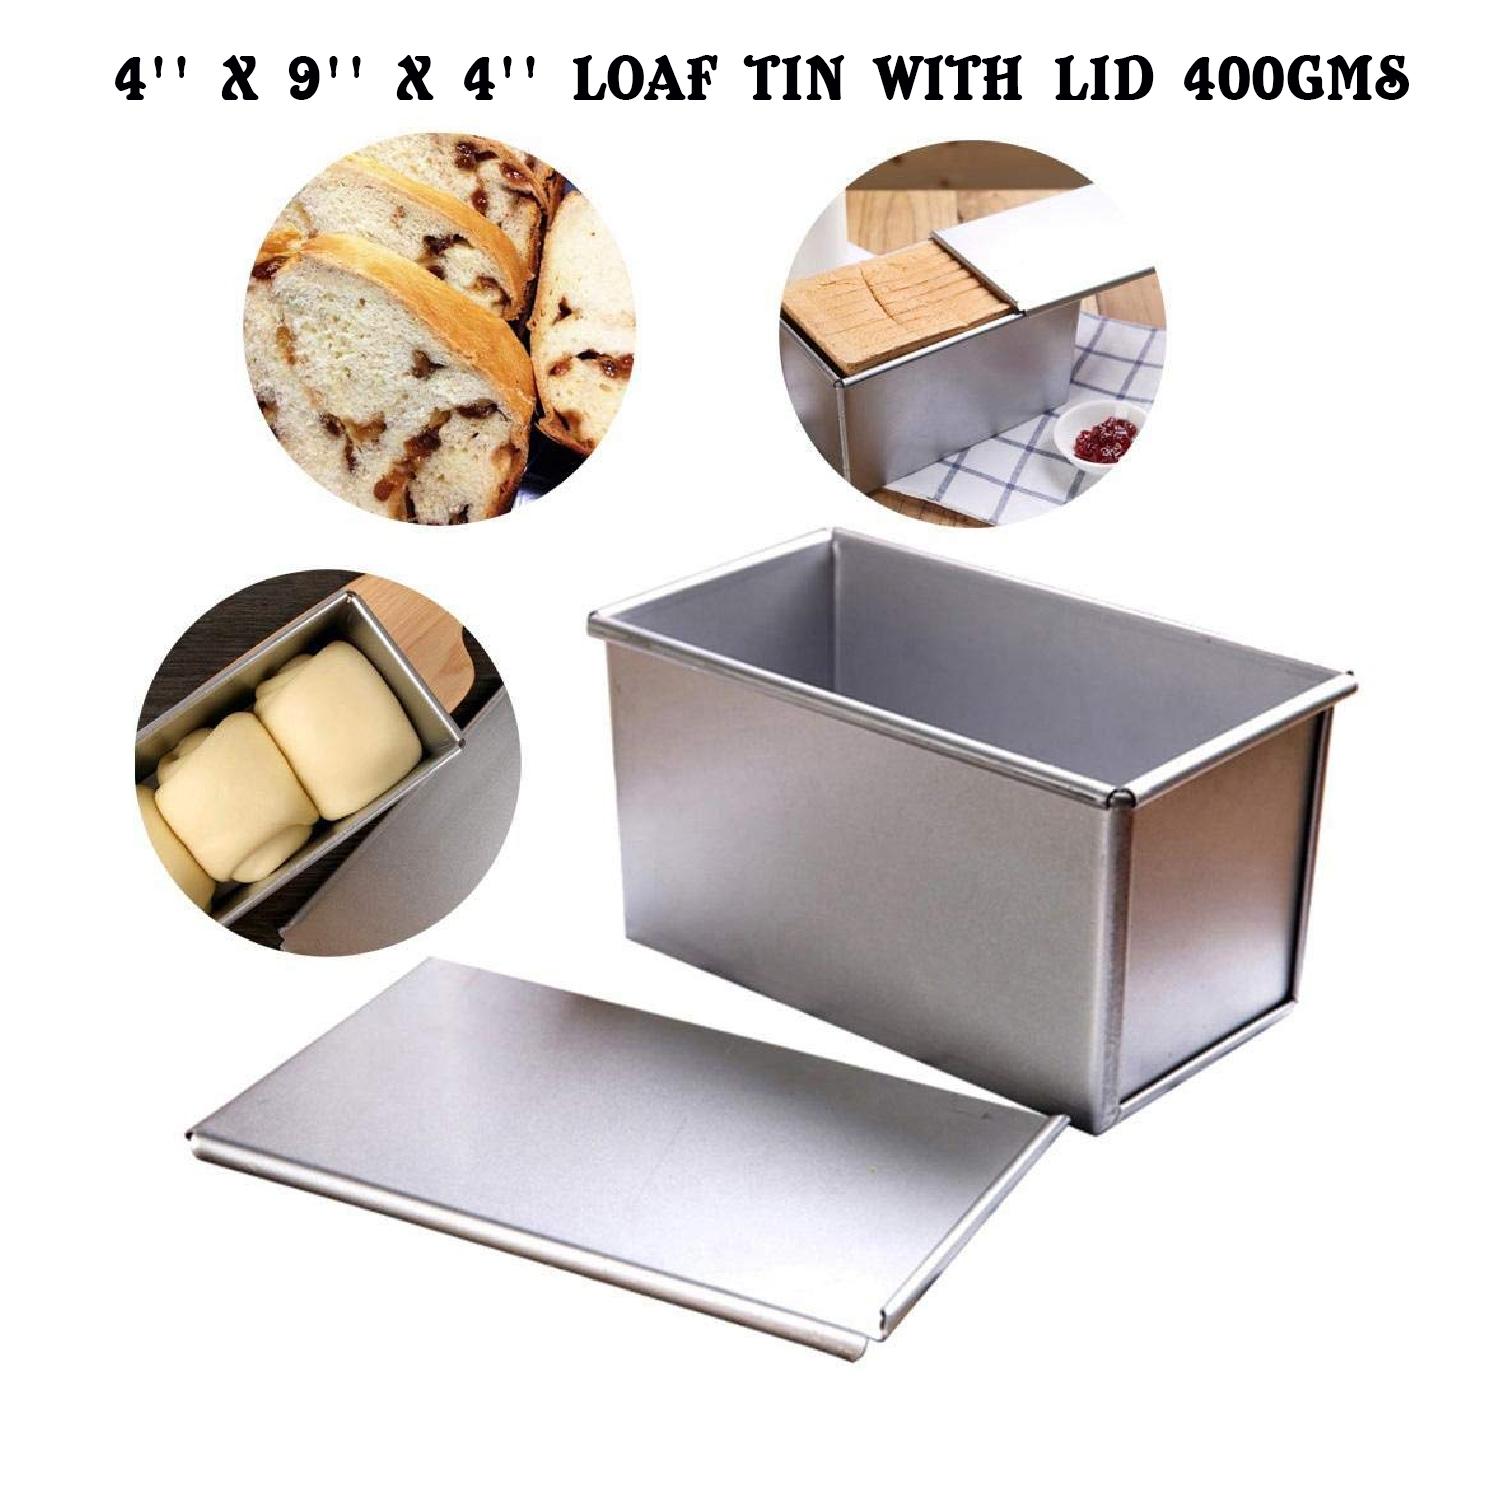 4'' X 9'' X 4'' LOAF TIN WITH LID 400GMS